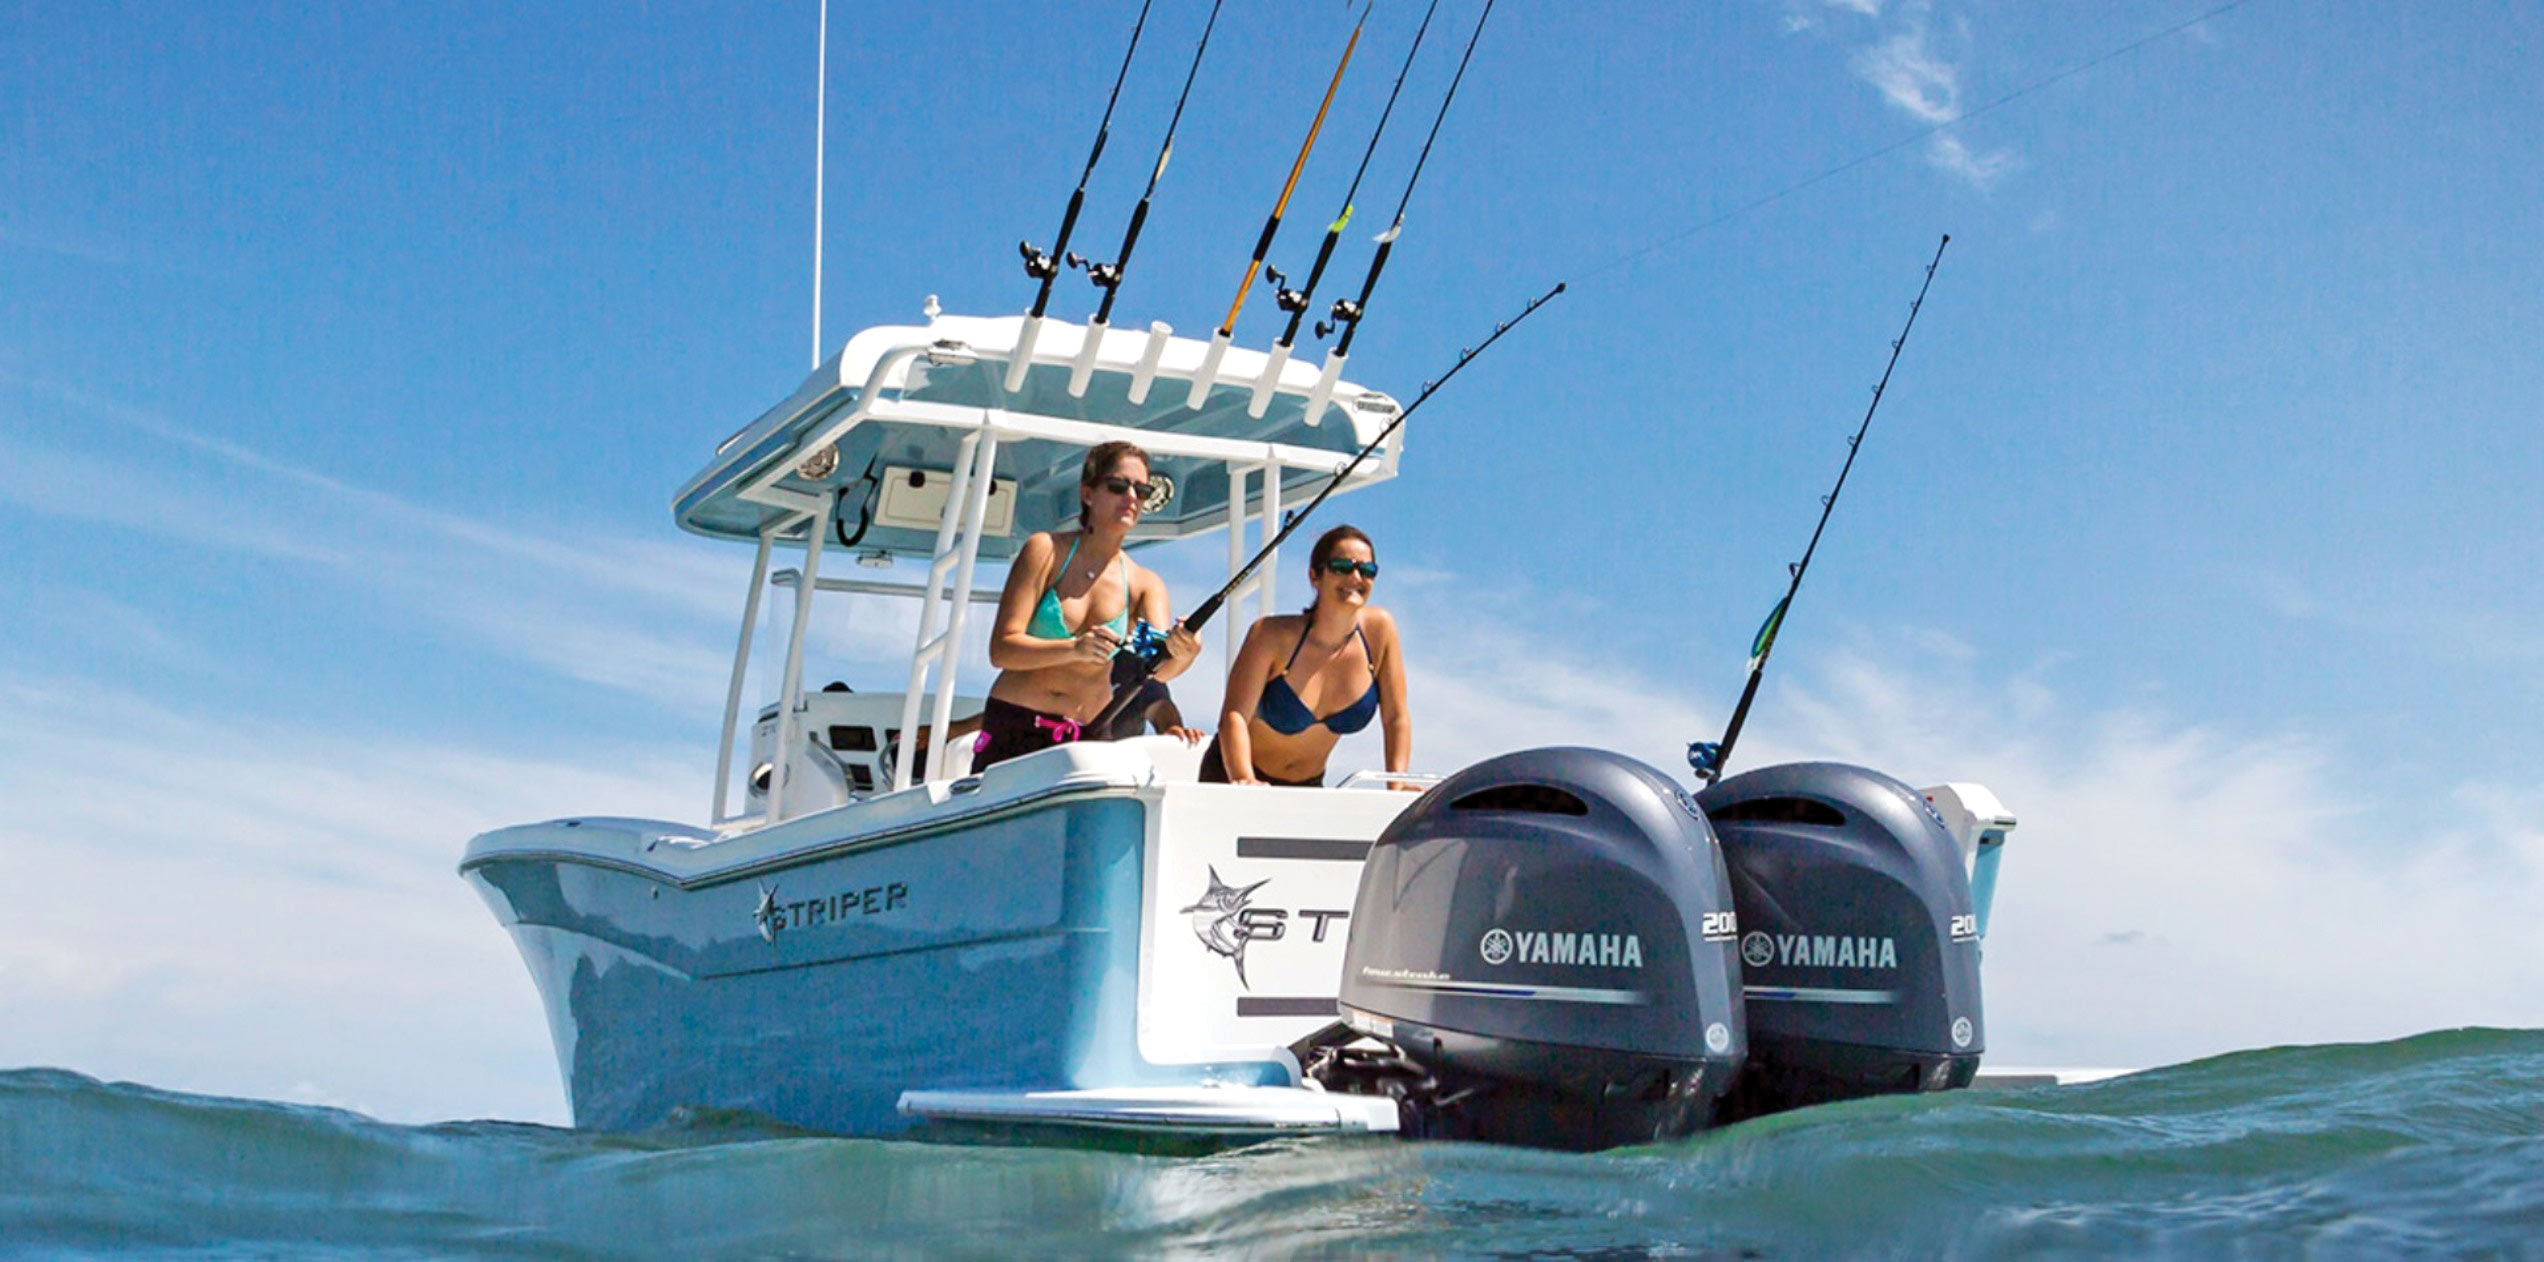 2020 Outboard Motor Buyer's Guide - The Fisherman